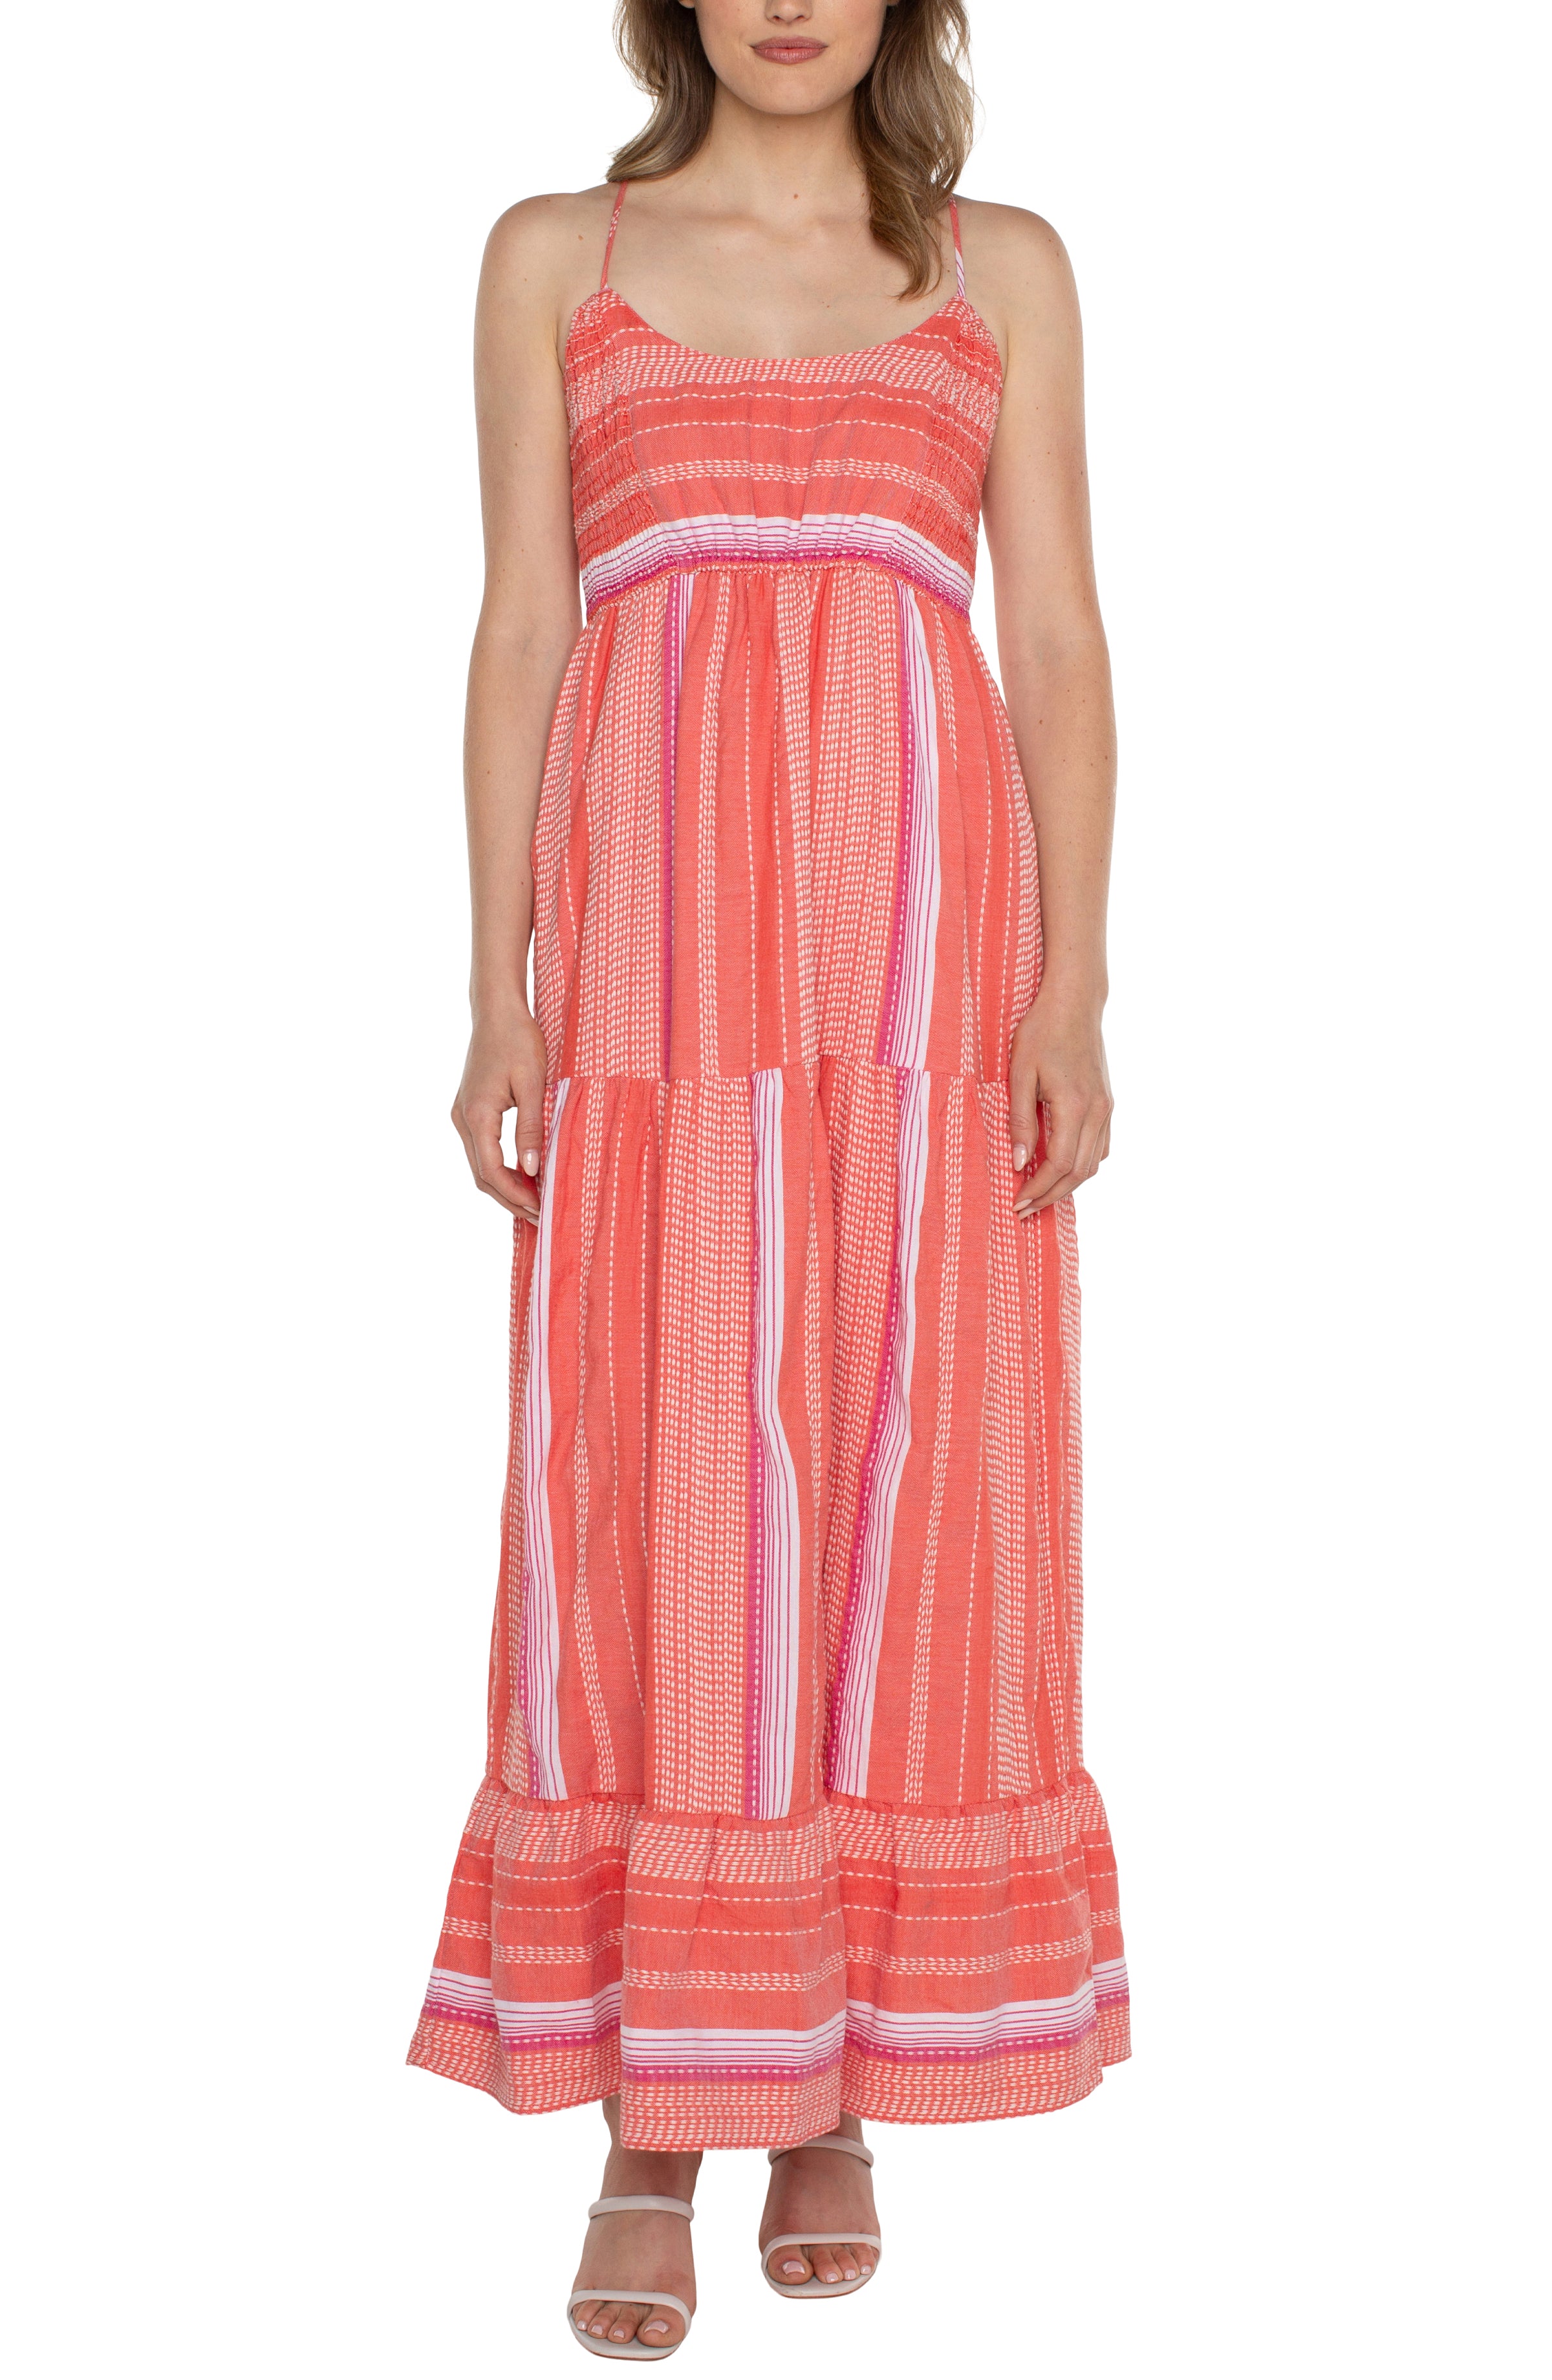 LVP Racer Back Tiered Maxi Dress - Coral Multi Front View